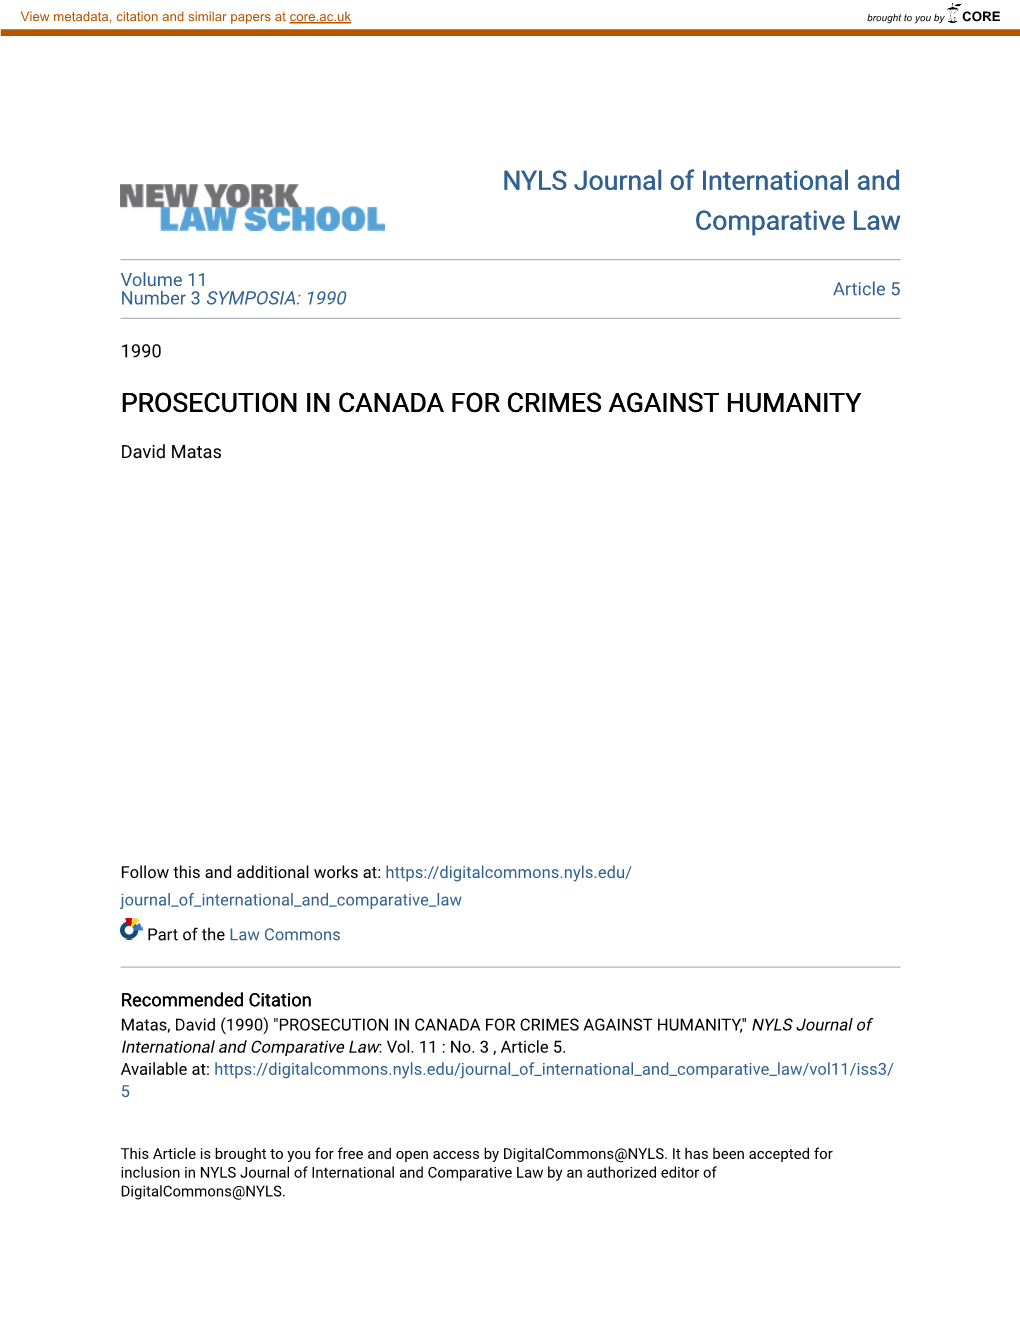 Prosecution in Canada for Crimes Against Humanity